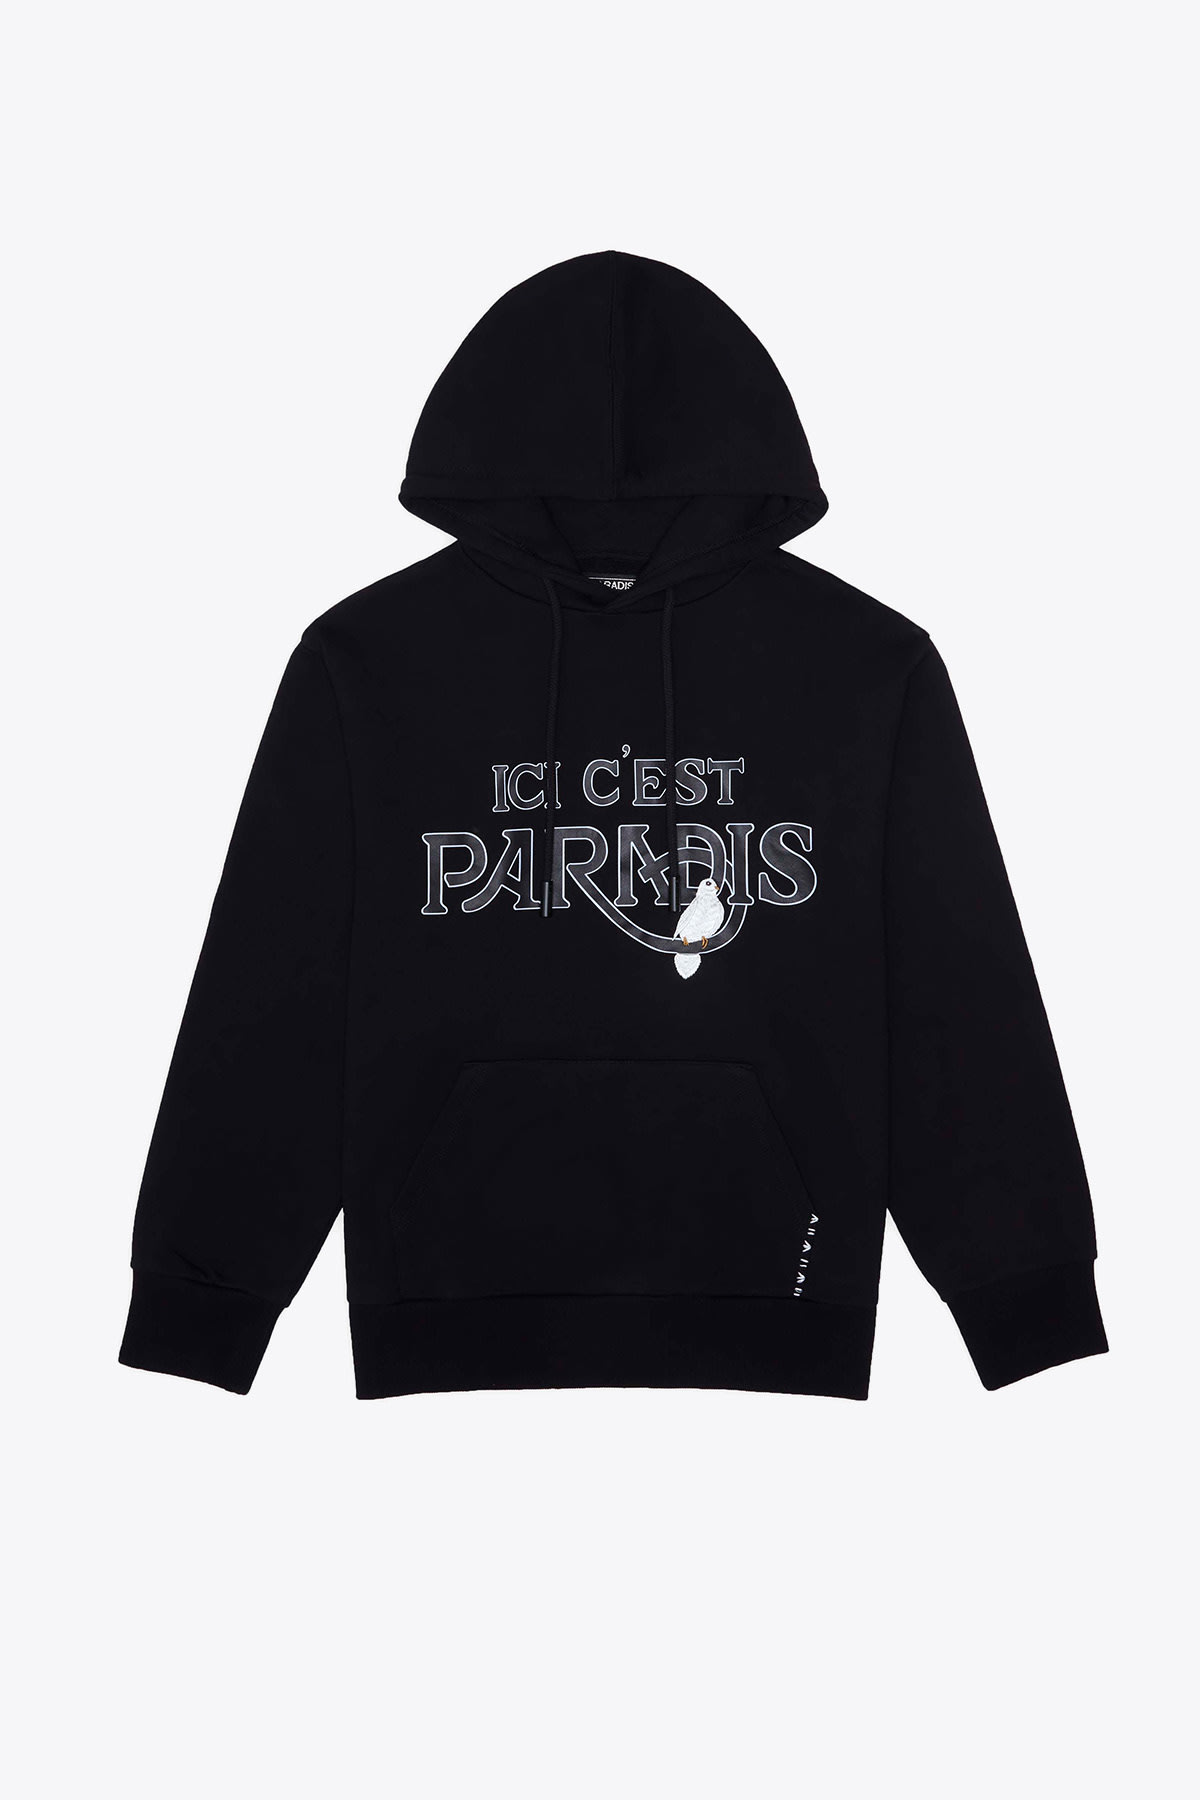 3.Paradis Hooded Sweater Black cotton hoodie with slogan PSG collab